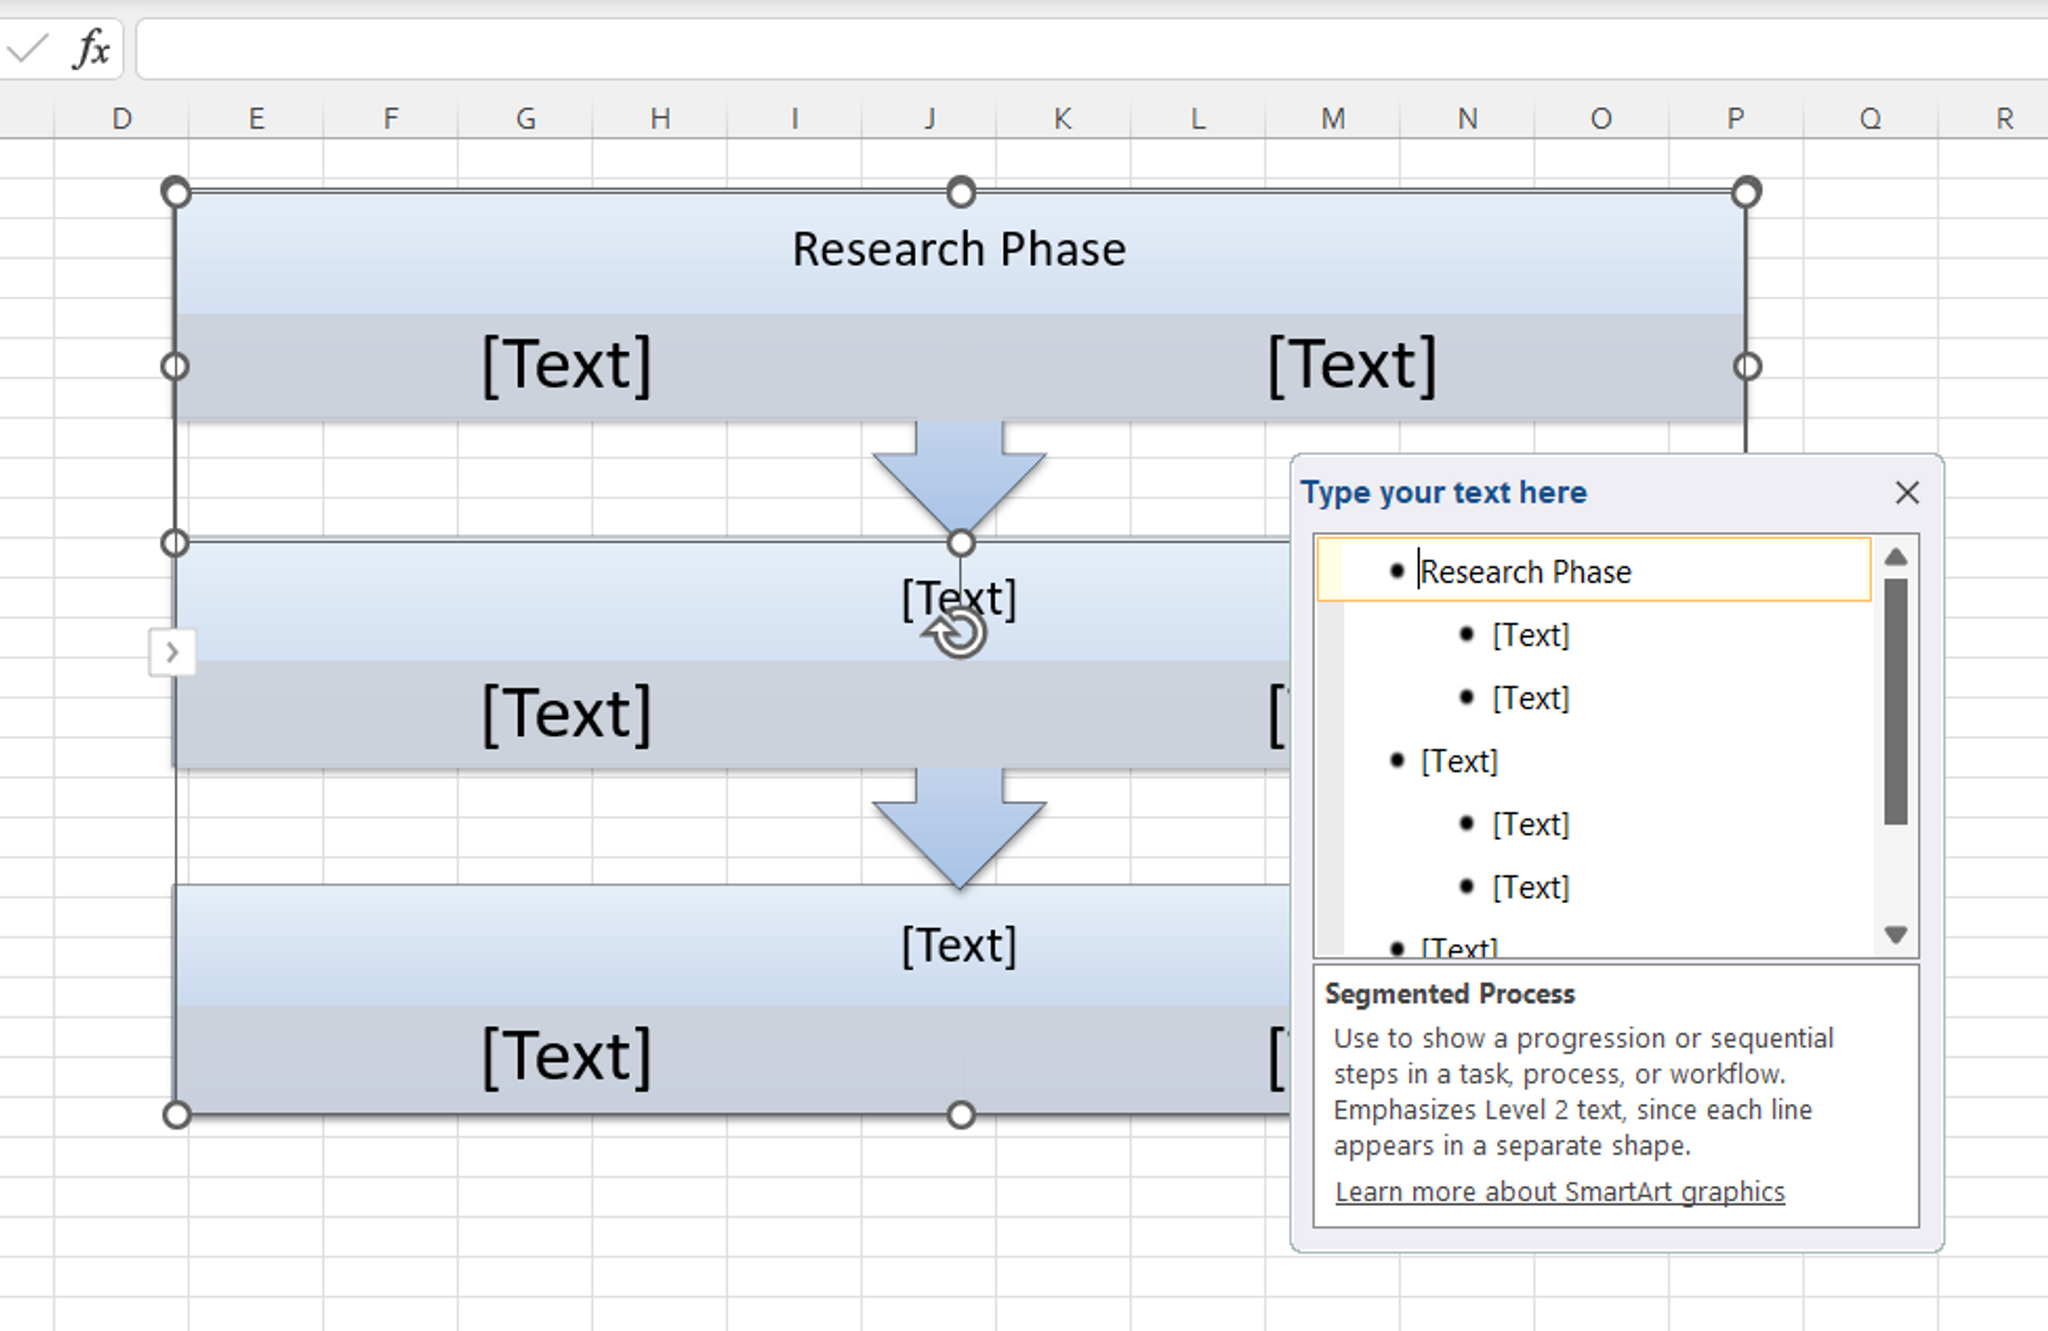 Text being filled in for a SmartArt flow chart in Excel